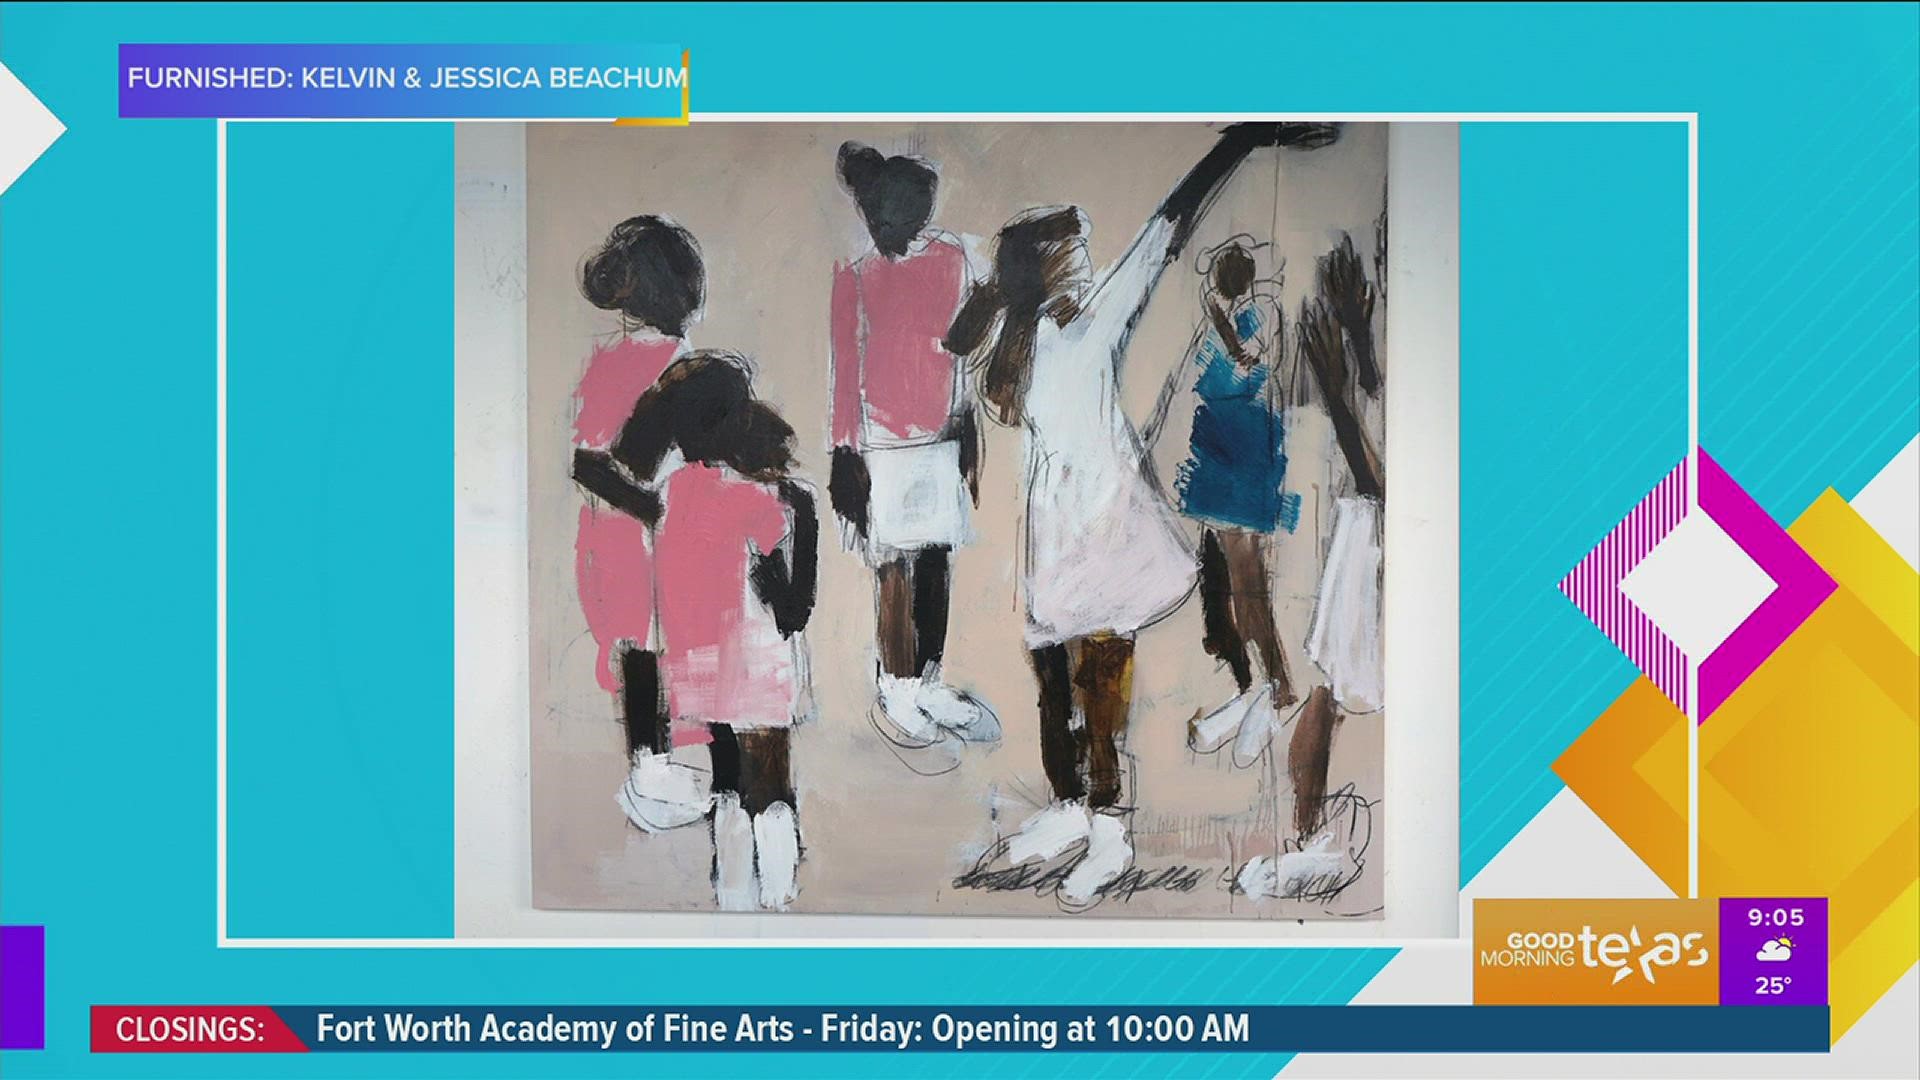 Arizona Cardinals Kelvin Beachum and his wife tell us about lending works by Black artists from their personal art collection for a special exhibition at SMU.